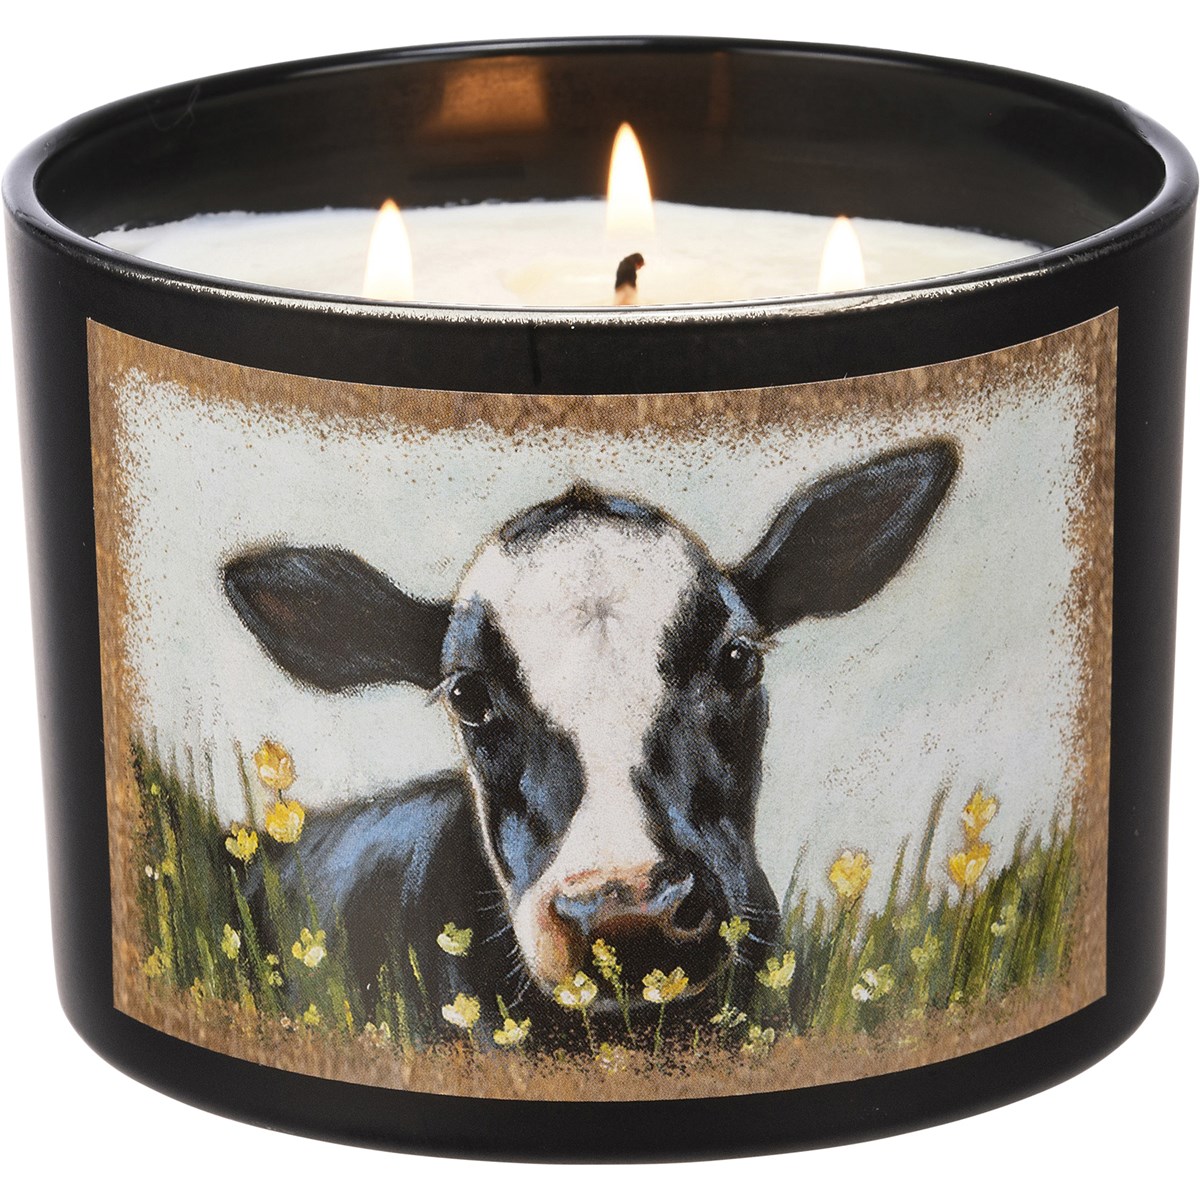 Cow In Buttercups Jar Candle - Soy Wax, Glass, Cotton